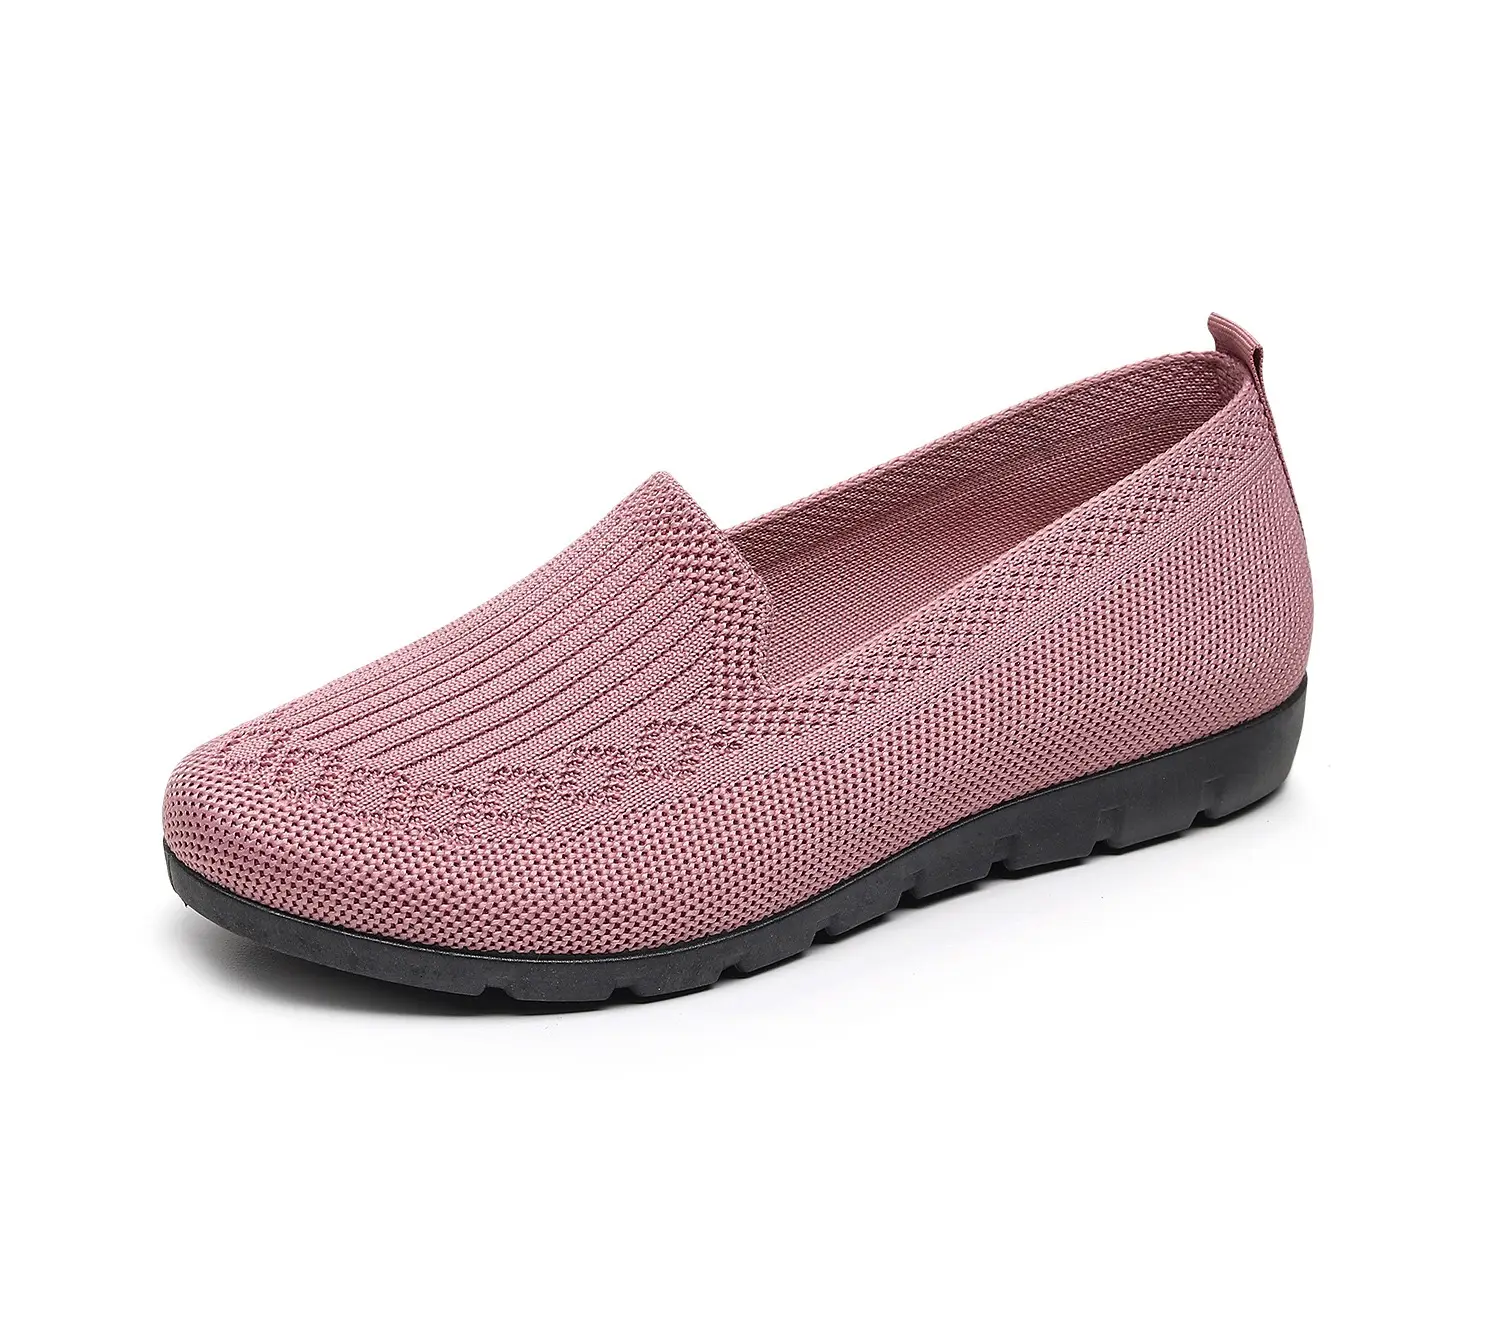 StepGrace New Women Casual Shoes Breathable Slip Mesh Breathable Sneakers Lightweight Slip On Flat Ladies Loafers Sock Shoes